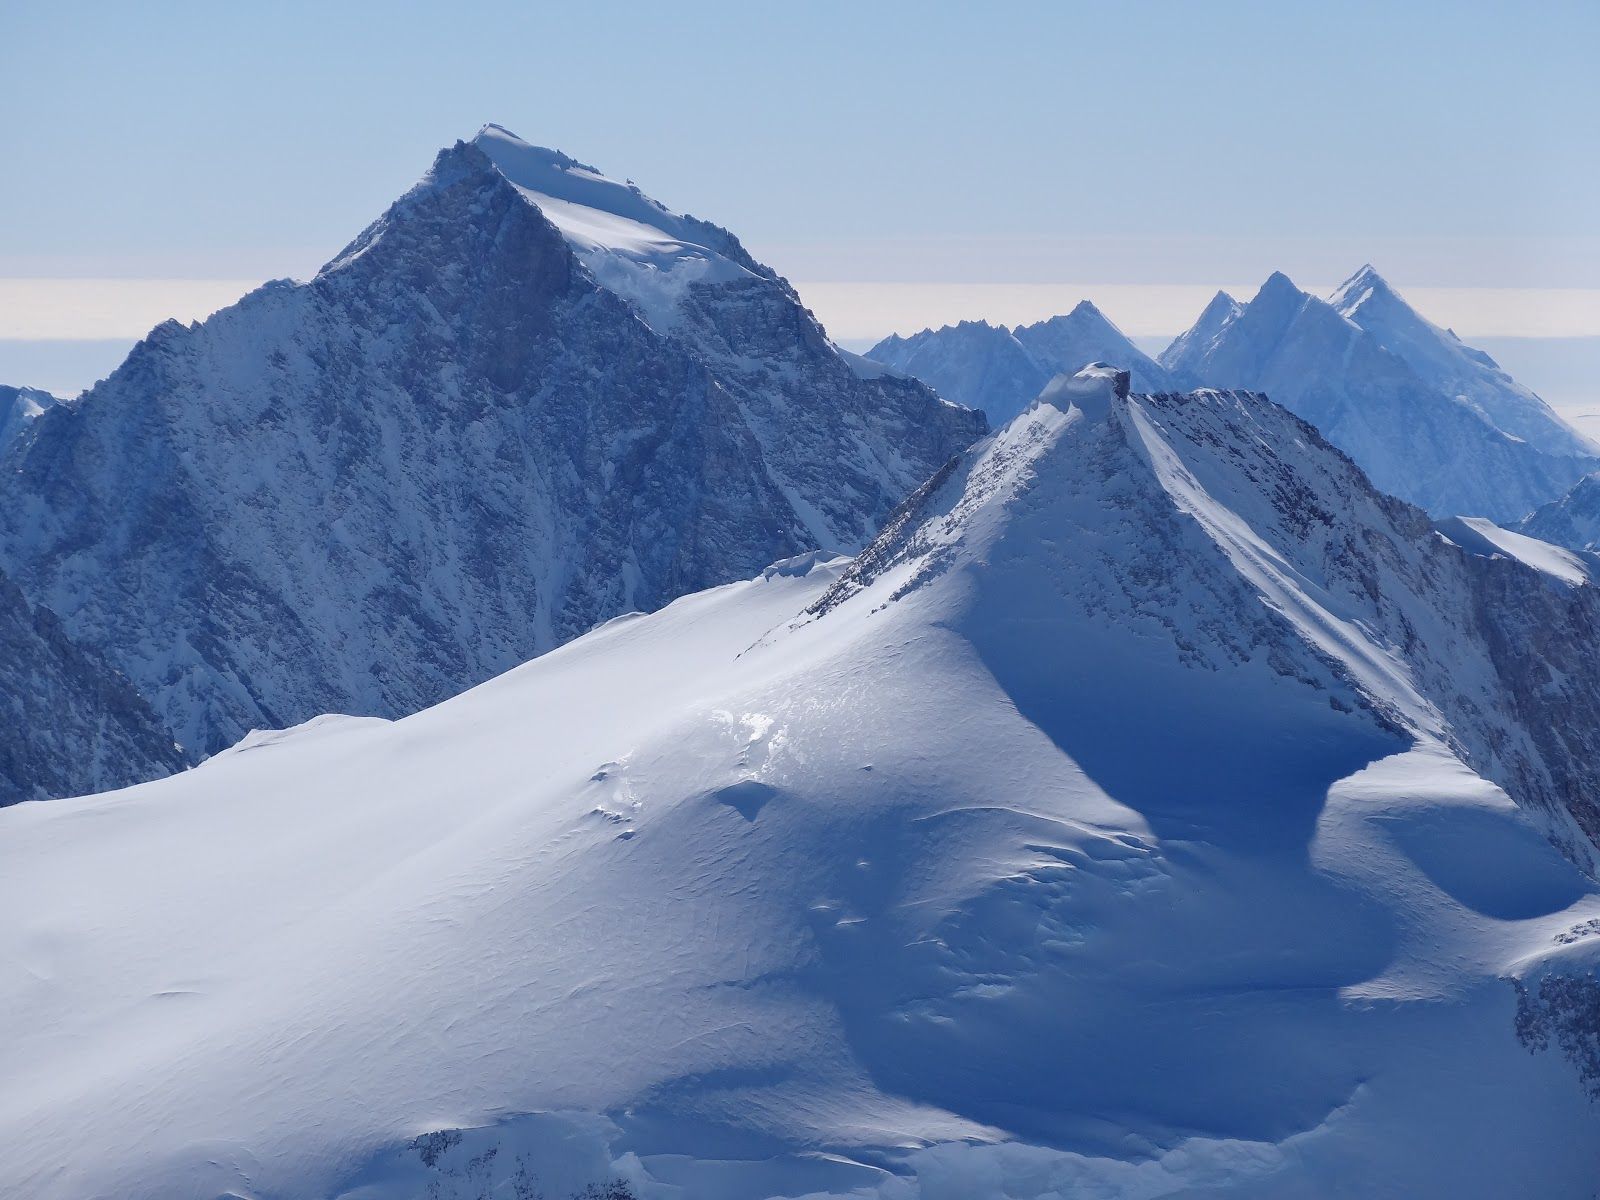 Vinson Massif - Get To Know One Of The Renowned "Seven Summits"